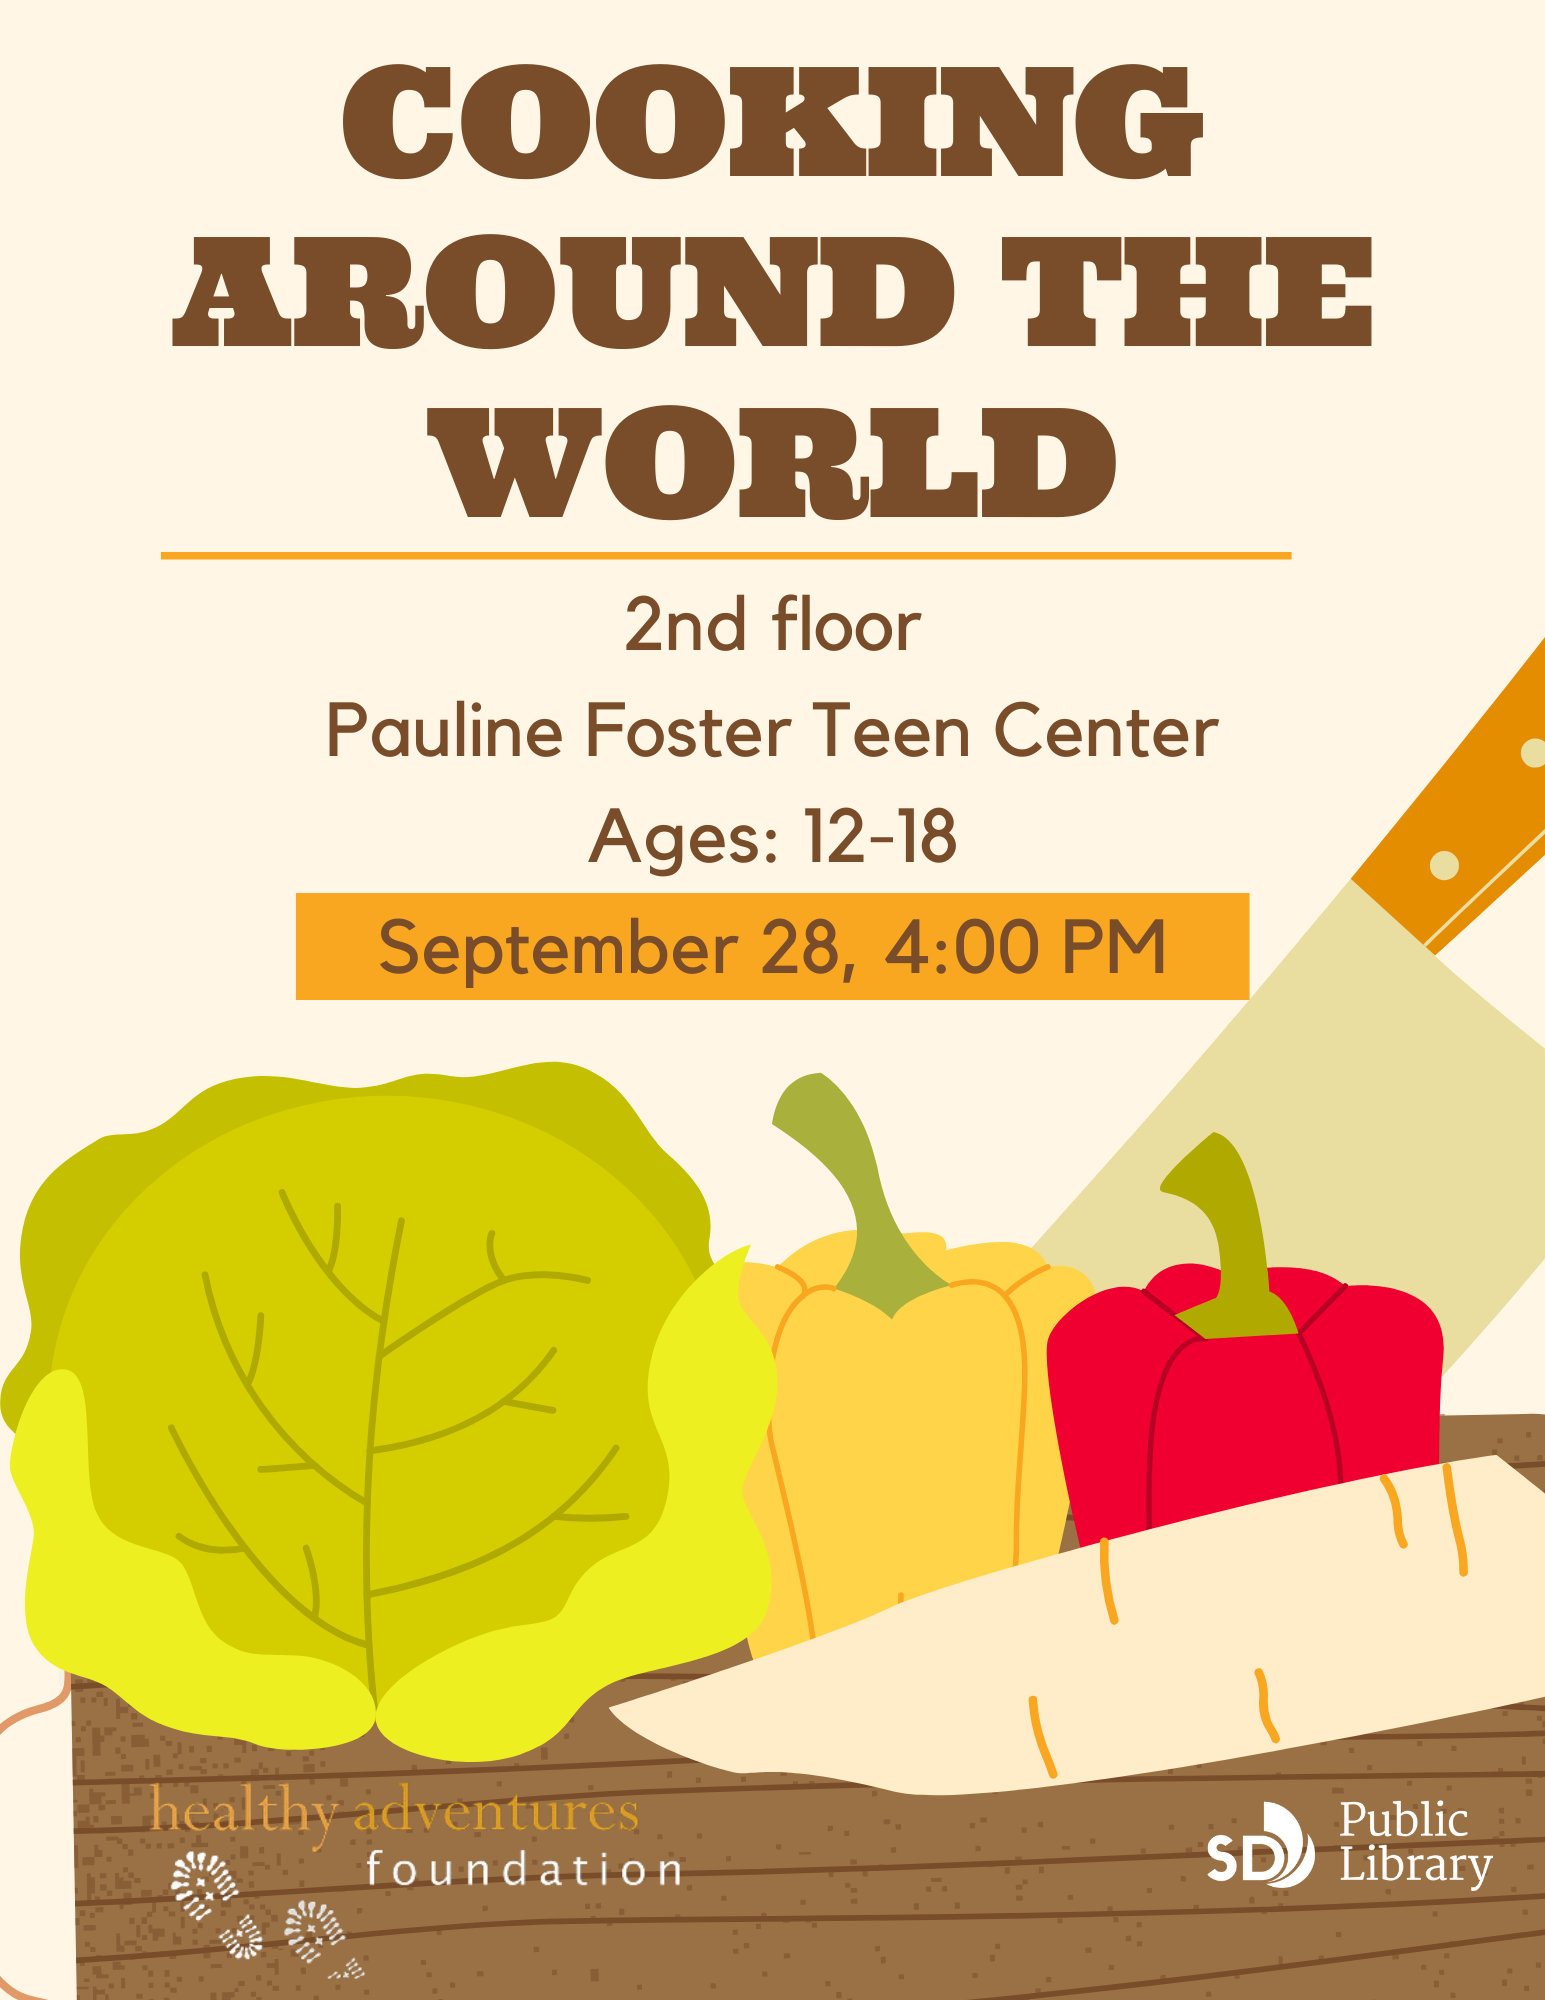 Cooking Around the World. 2nd floor, Pauline Foster Teen Center, Ages 12-18. September 28 at 4pm.